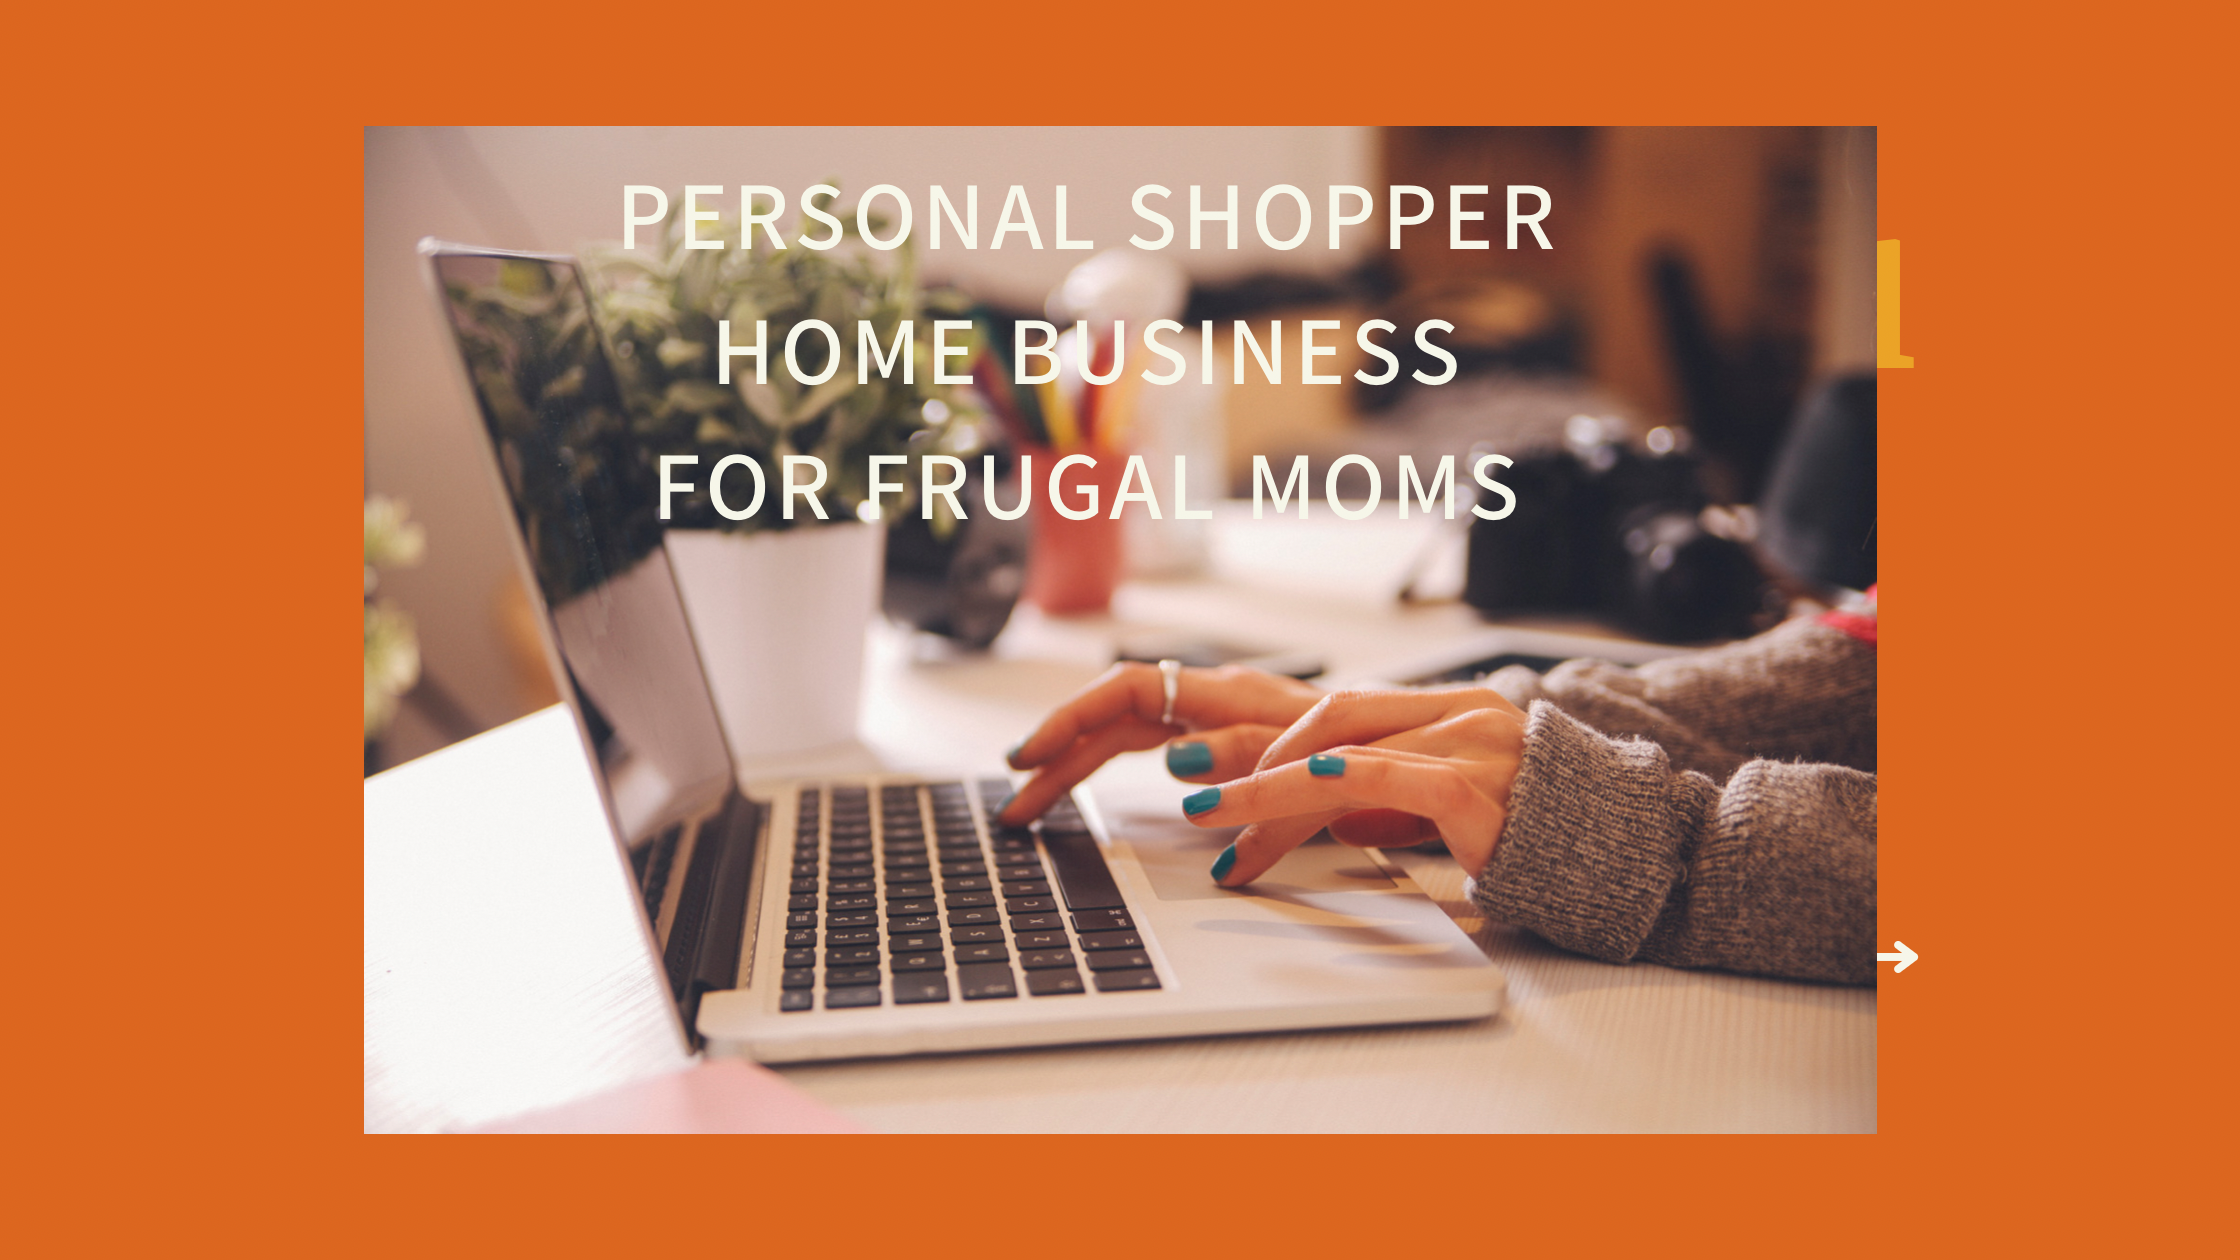 Personal Shopper Home Business for Frugal Moms